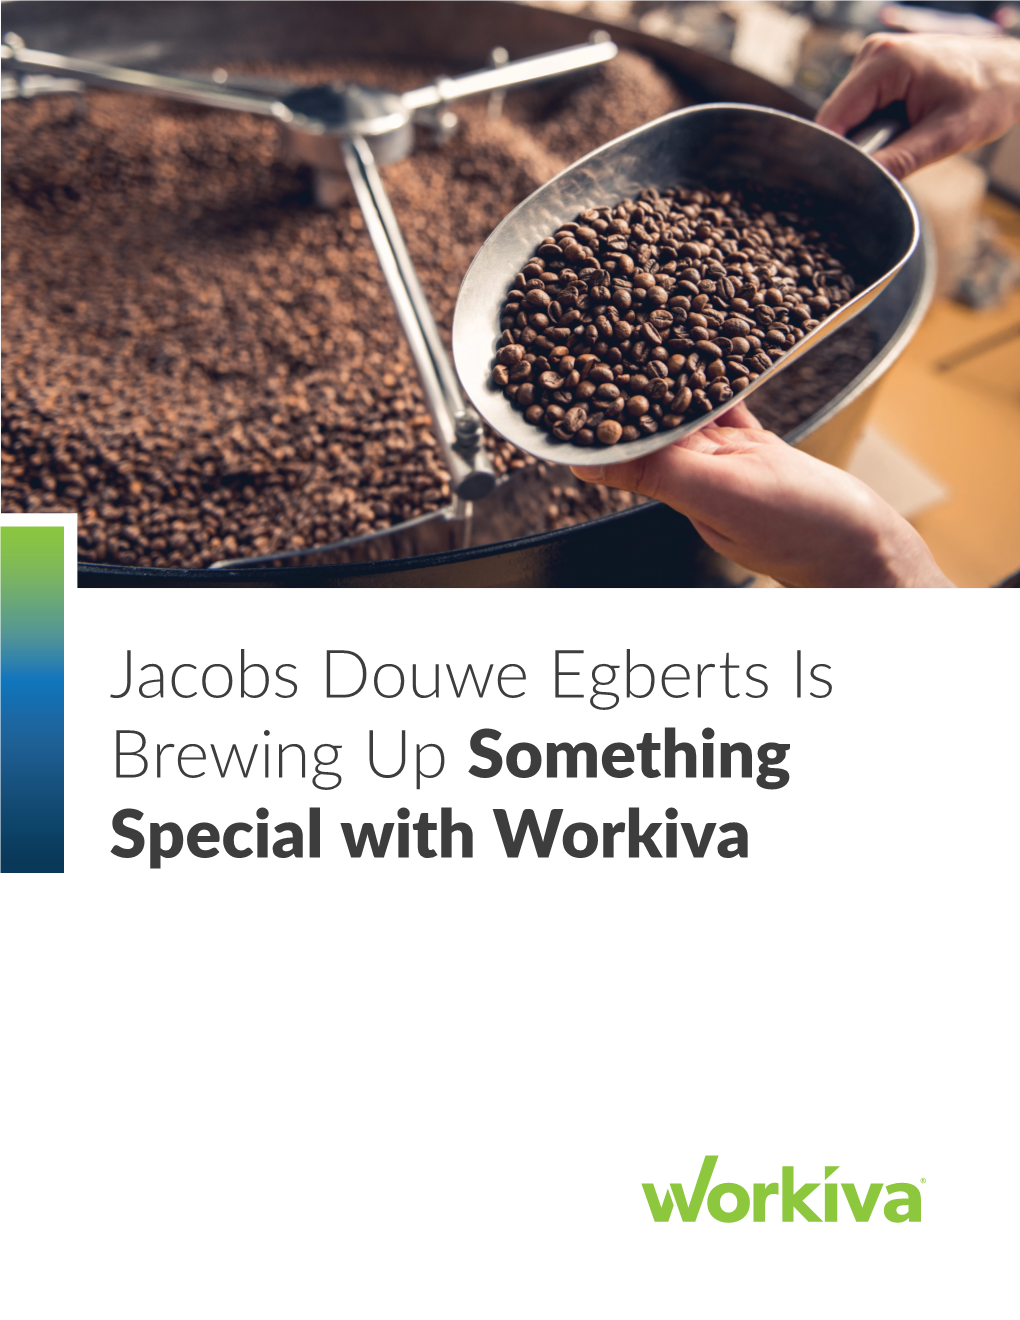 Jacobs Douwe Egberts Is Brewing up Something Special with Workiva